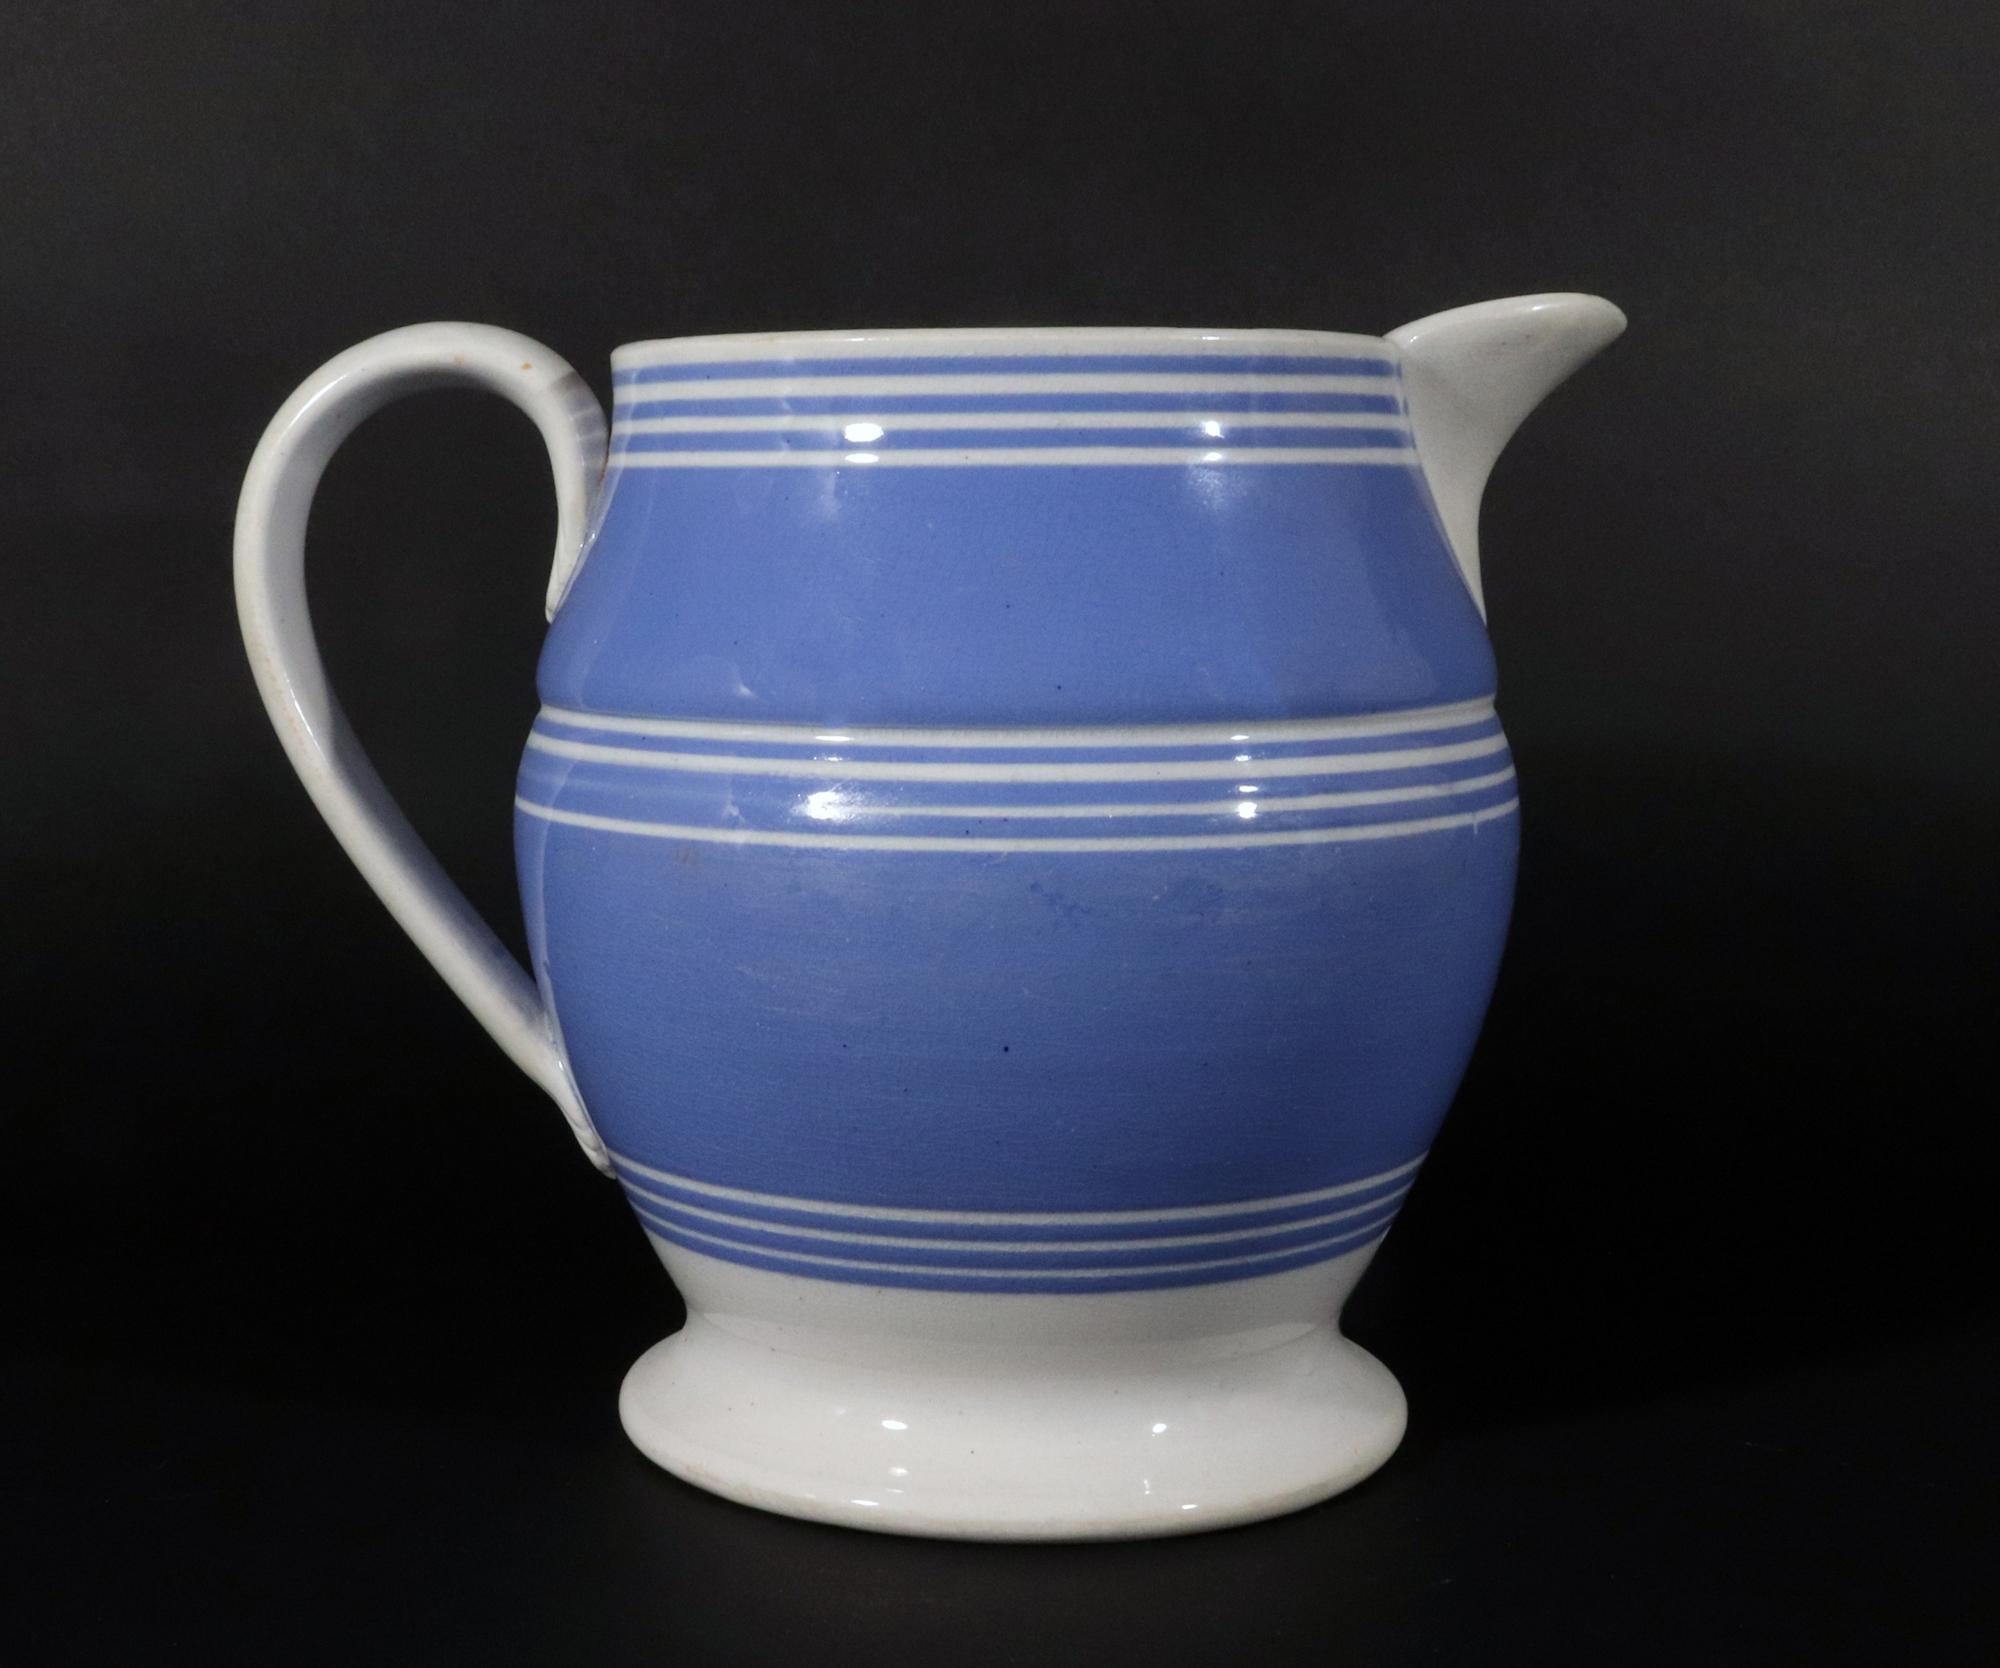 English Mocha-decorated Pottery Blue Slip Jug with White Bands,
Circa 1820

This slip-decorated pearlware jug features a vibrant blue slip ground adorned with three distinct groupings of four thin white bands. The bands encircle the body of the jug,